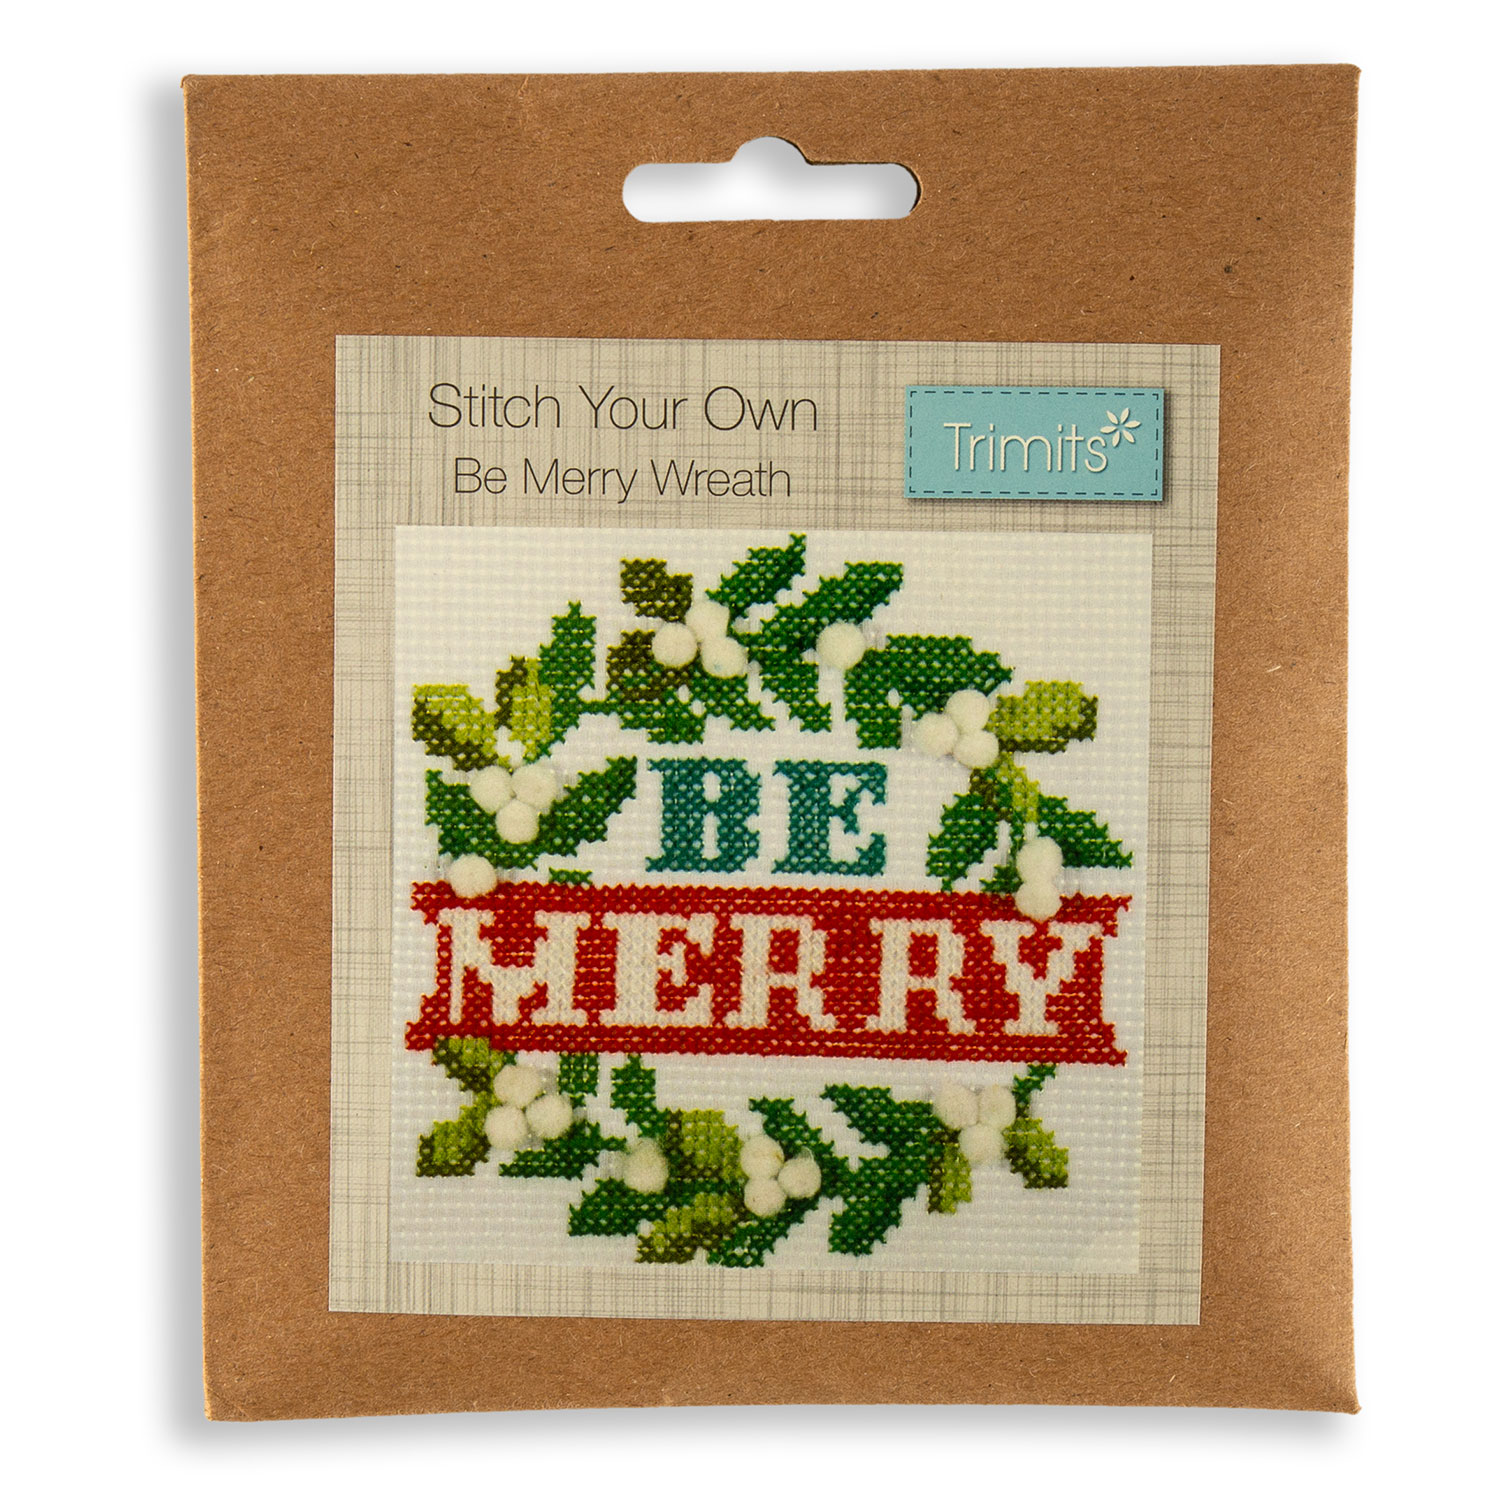 Trimits Christmas Counted Cross Stitch Kit - Choose Any 4 - Be Merry Wreath